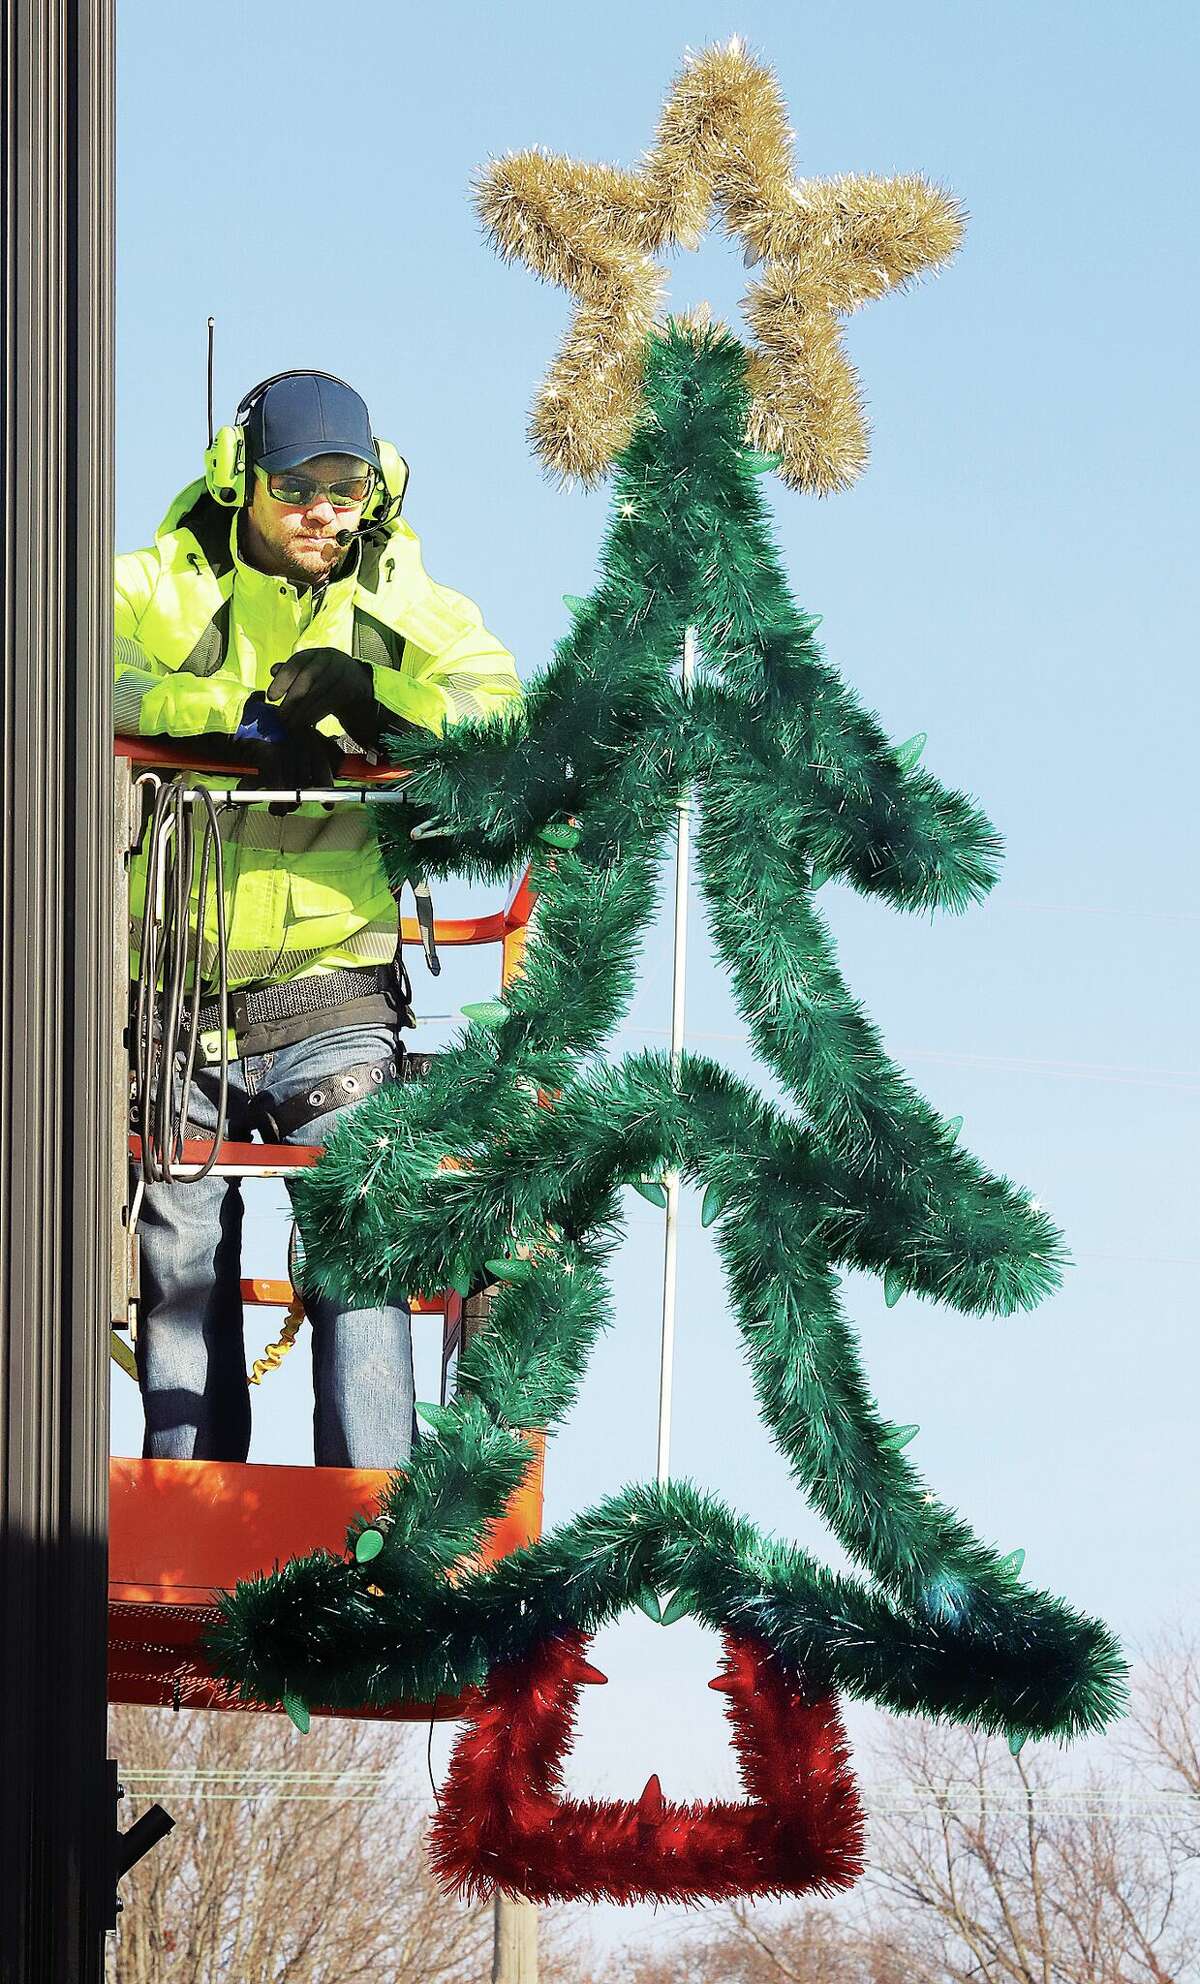 John Badman|The Telegraph Roxana Public Works employees took advantage of Monday's sunshine to remove the village's Christmas decorations on Central Avenue. Temperatures will be more moderate this week with highs forecast in the mid to upper 50s through Wednesday.